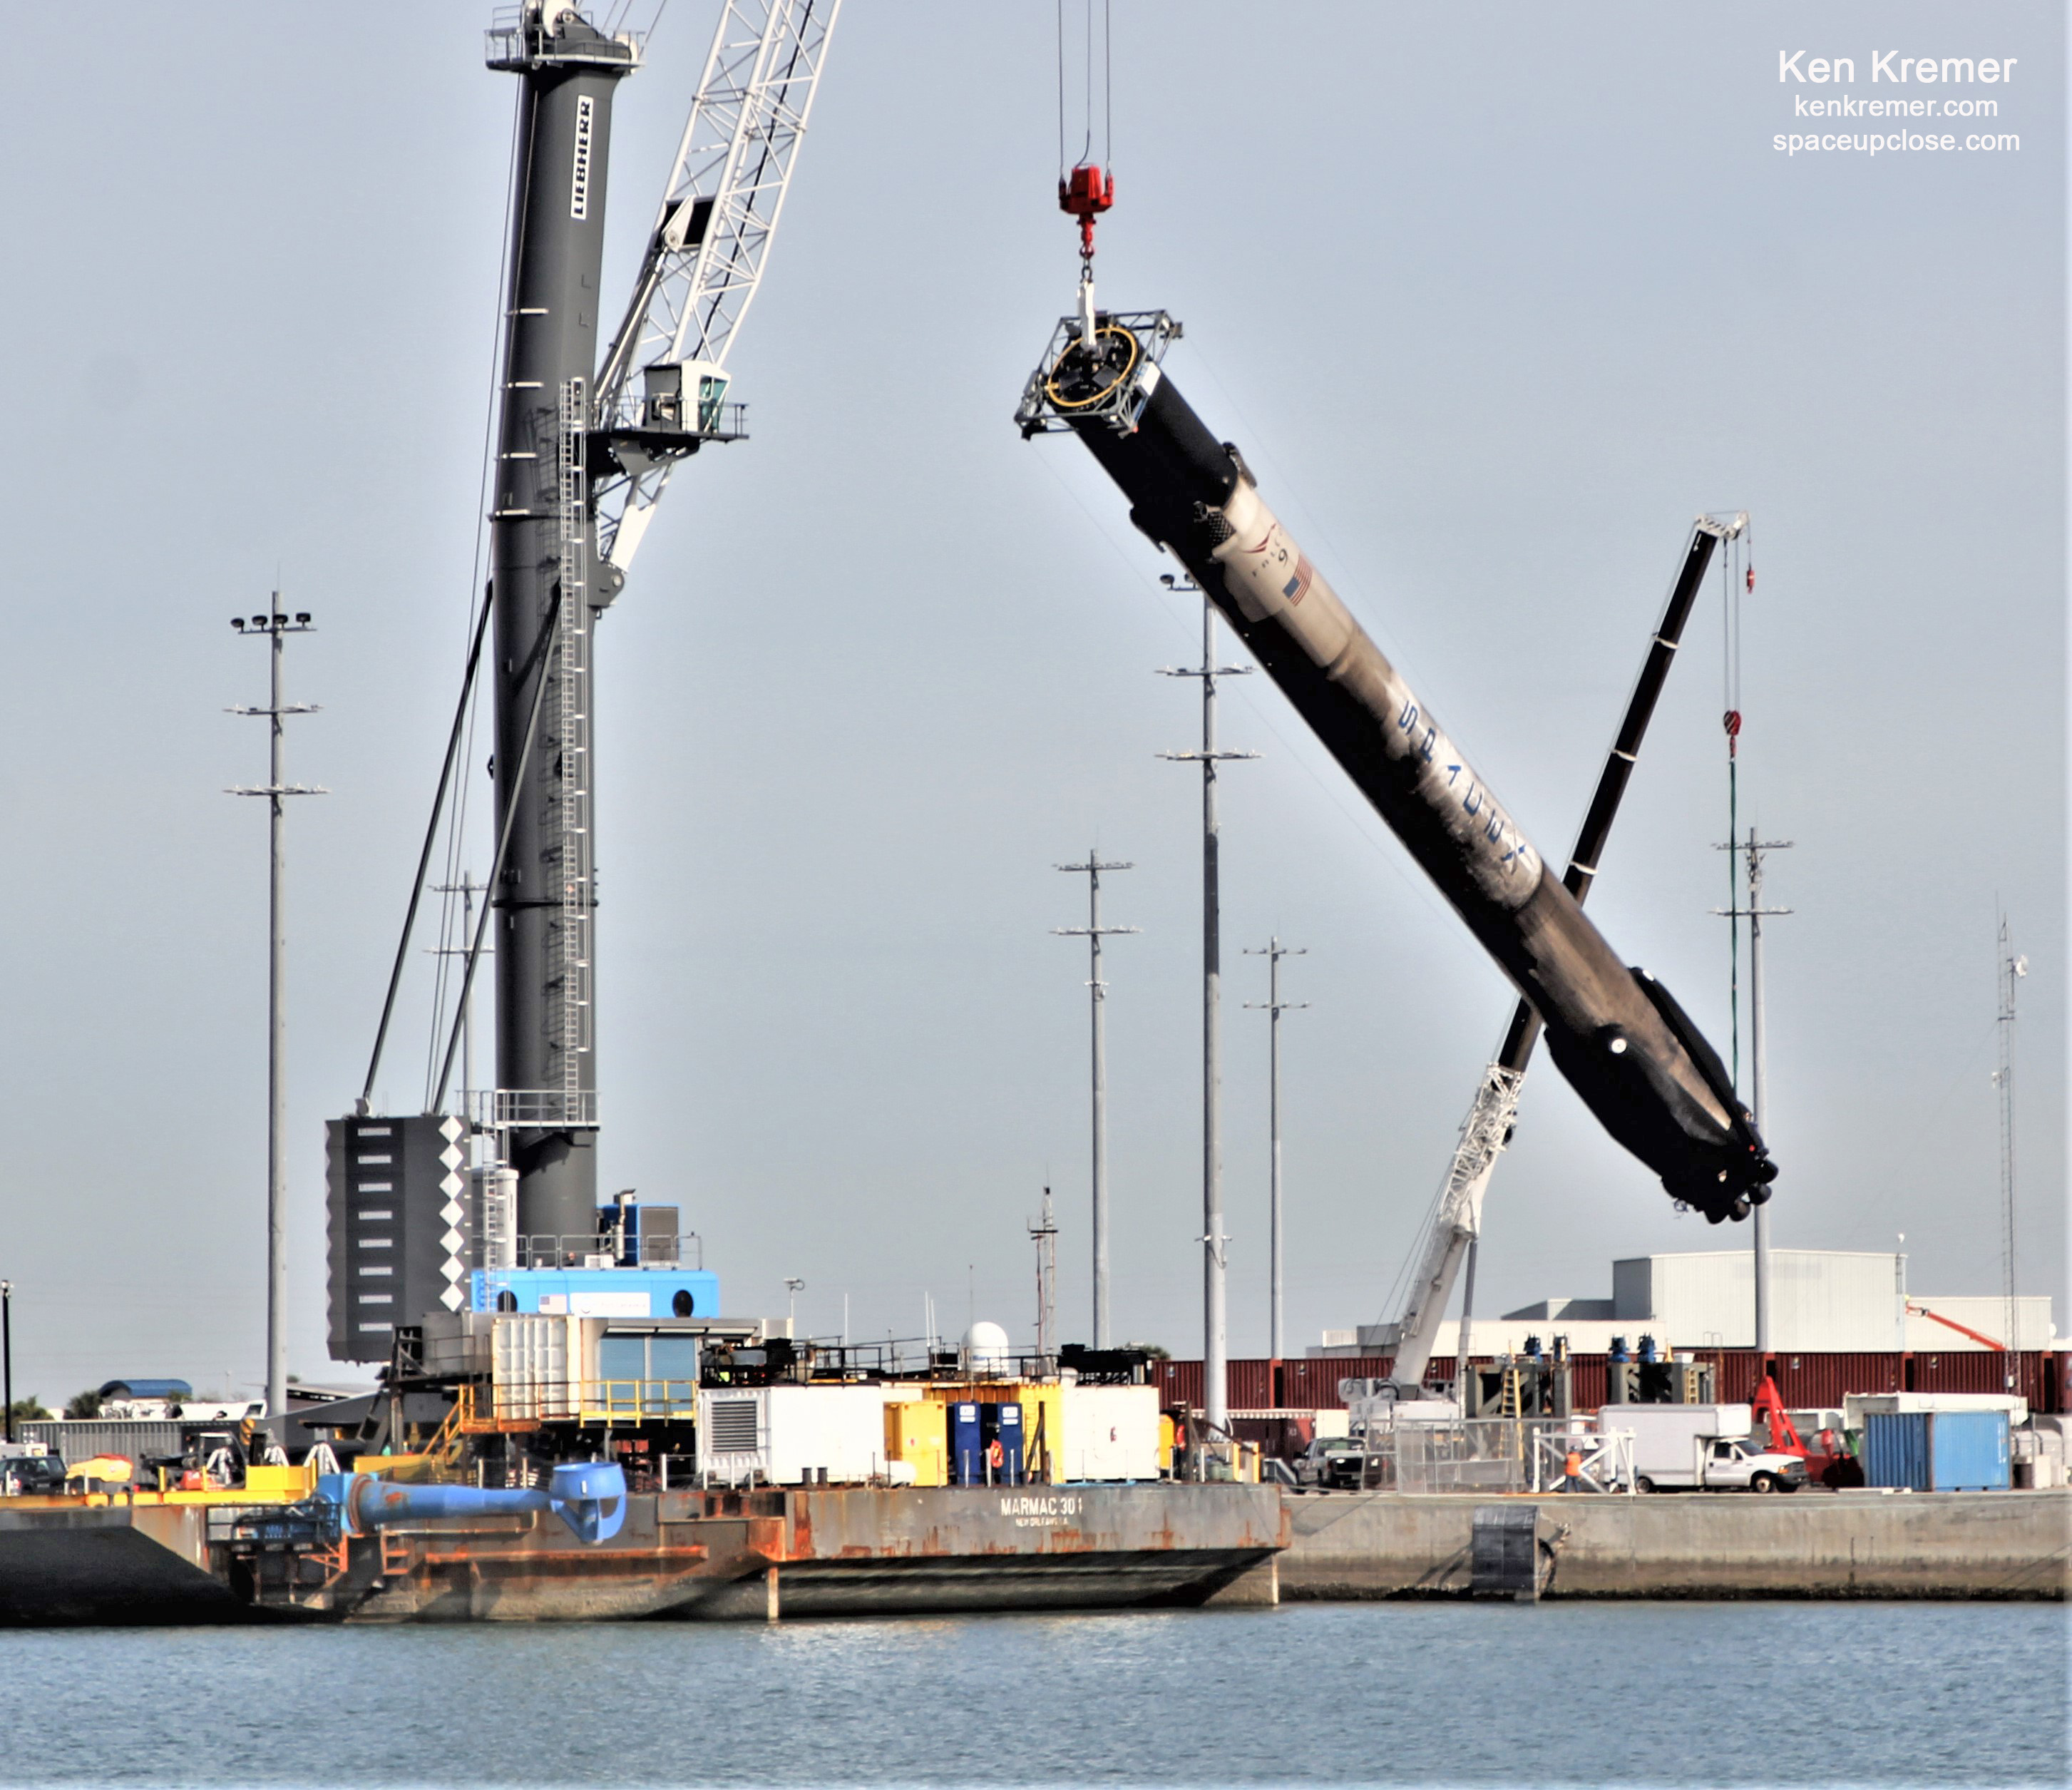 Despite Hard Droneship Landing SpaceX Retracts All 4 Recycled Falcon 9 Starlink Landing Legs, Lowered Horizontal for Cape Transport: Photos